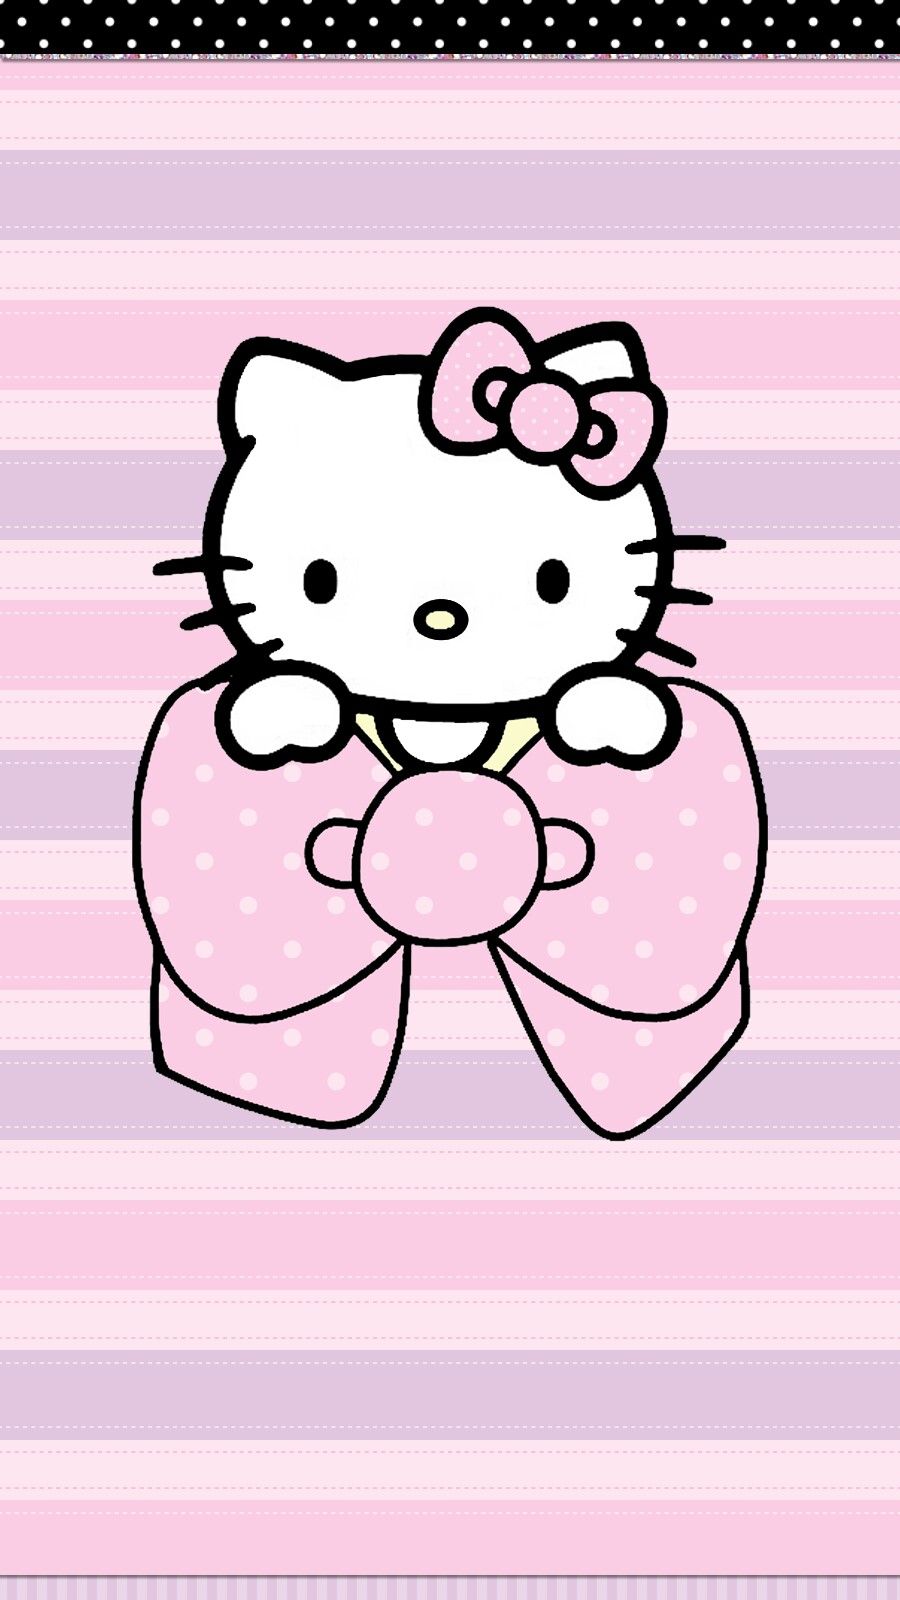 Its a girl wallpaper iphone Cute walls by me Walpaper hello 900x1600